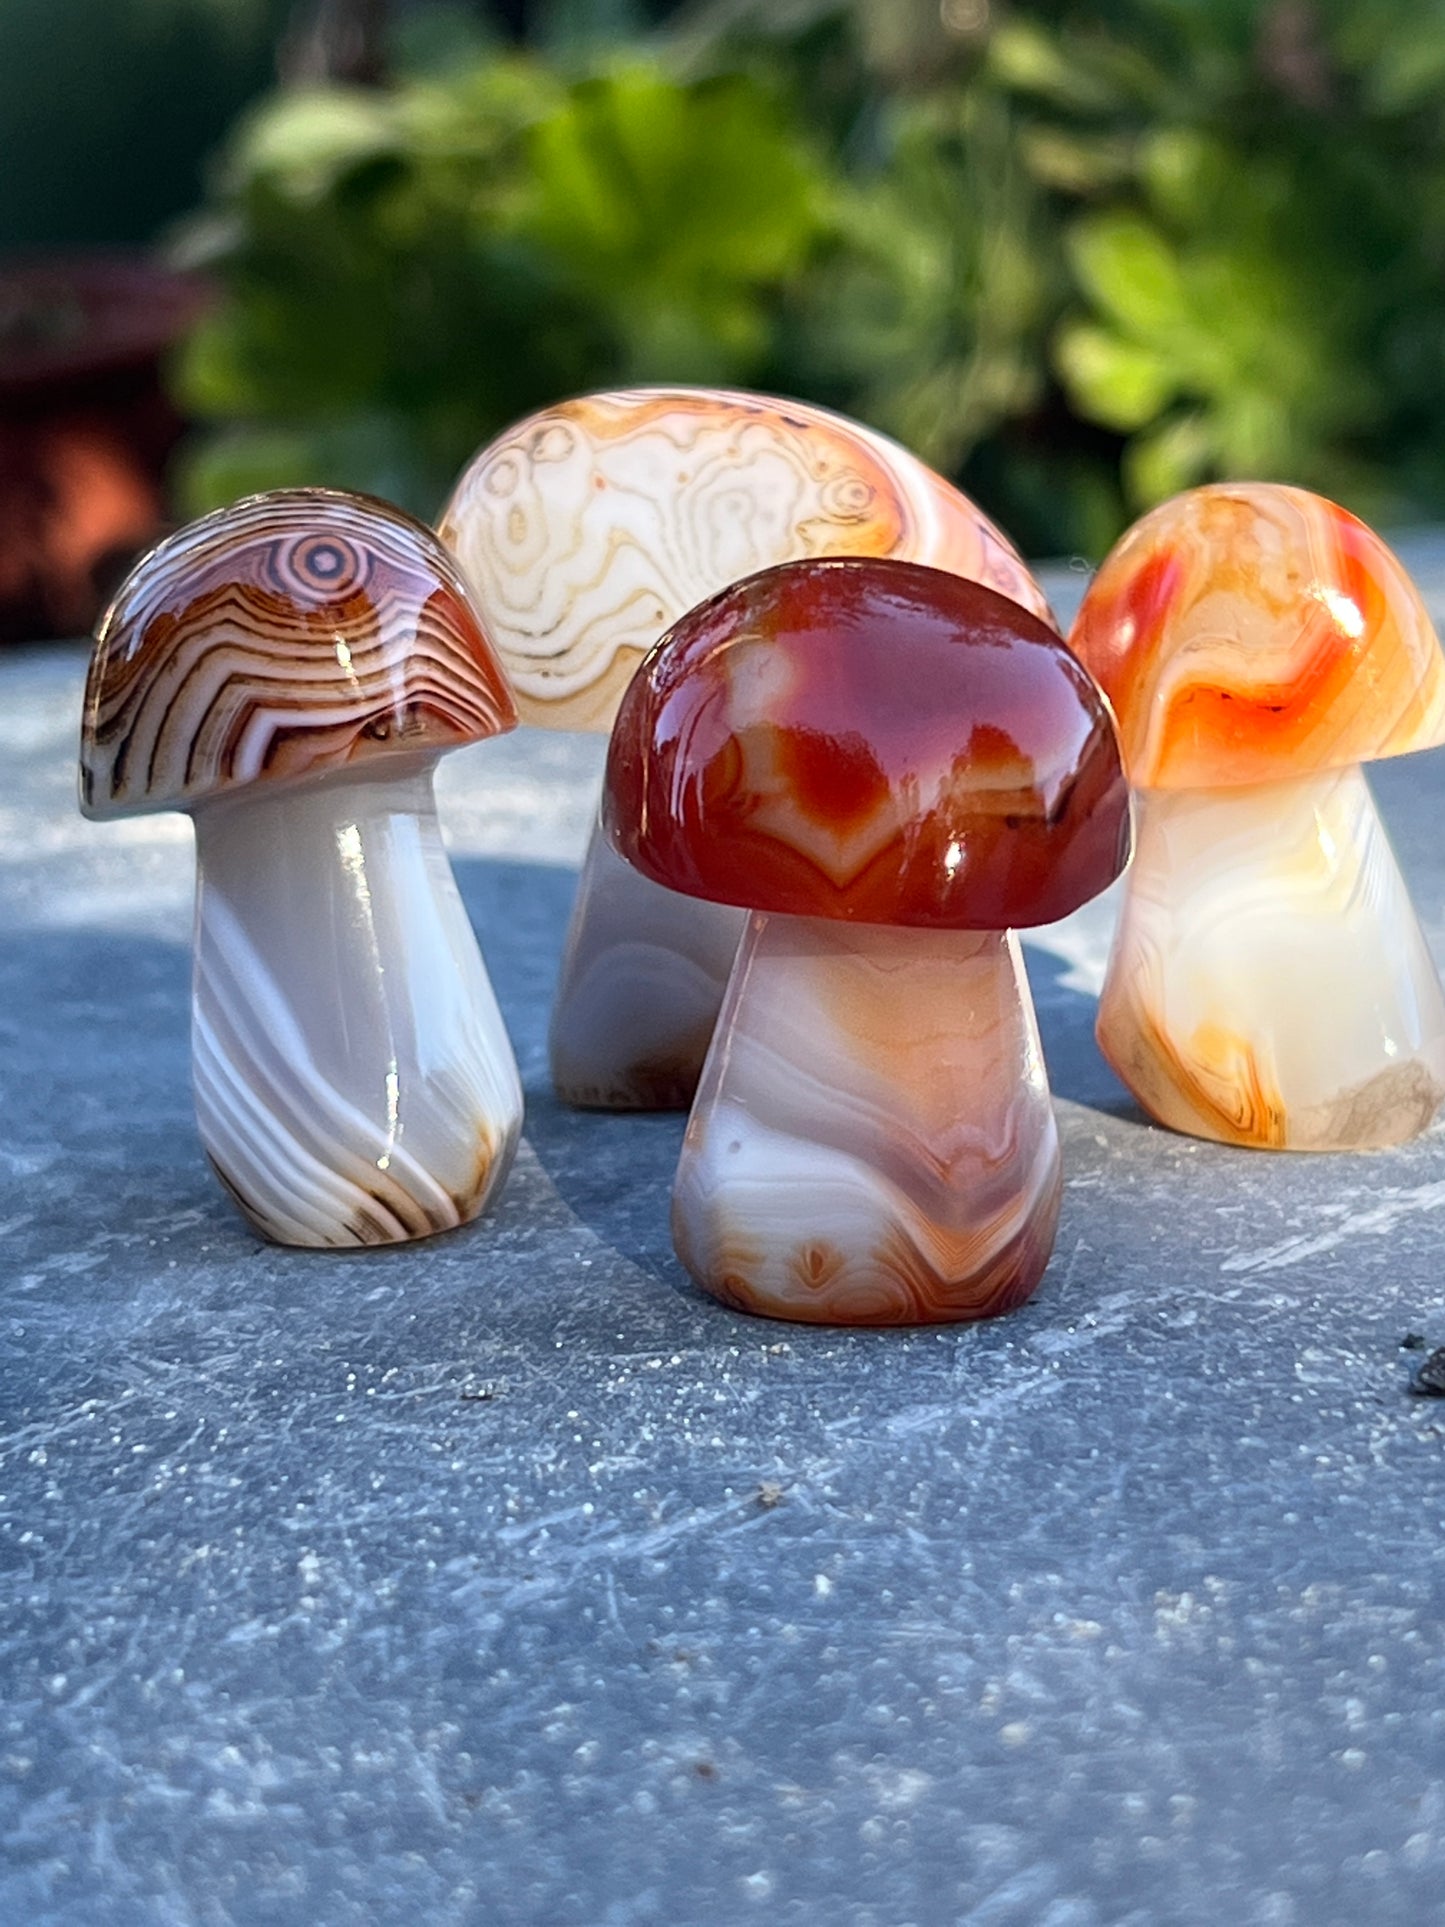 
                  
                    A group of banded carnelian mushrooms sitting on a concrete surface.
                  
                